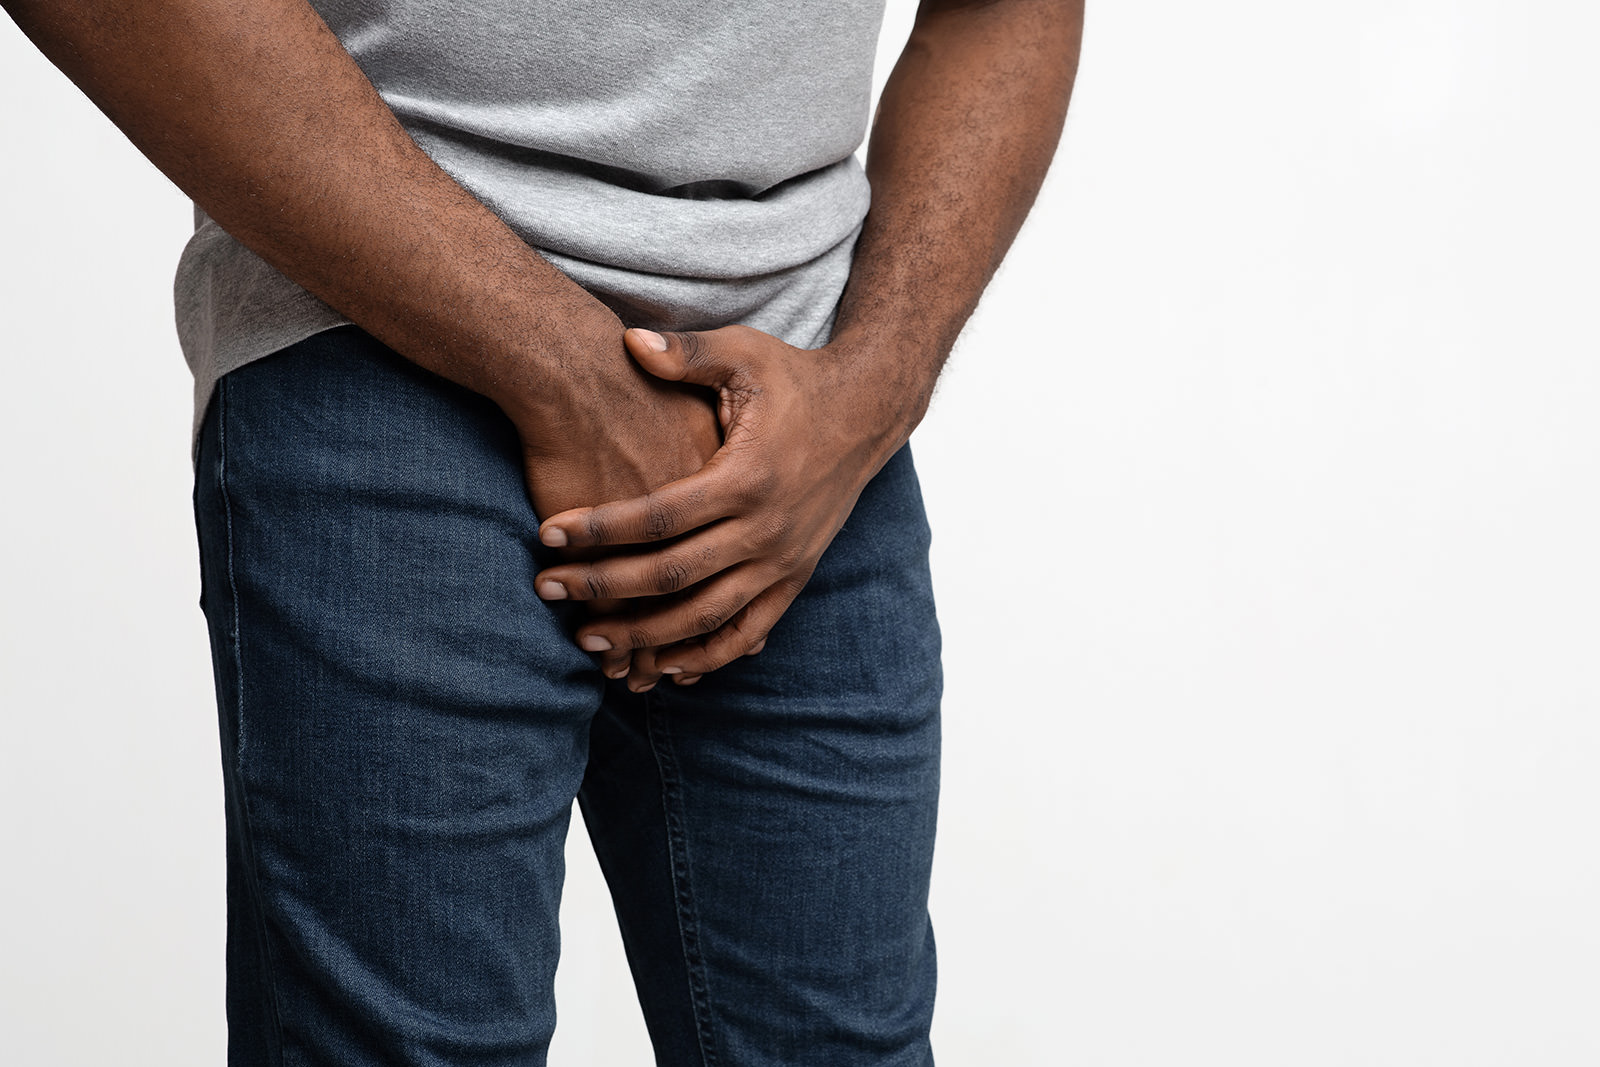 Phimosis In Men: Know Symptoms, Causes And Treatment Options